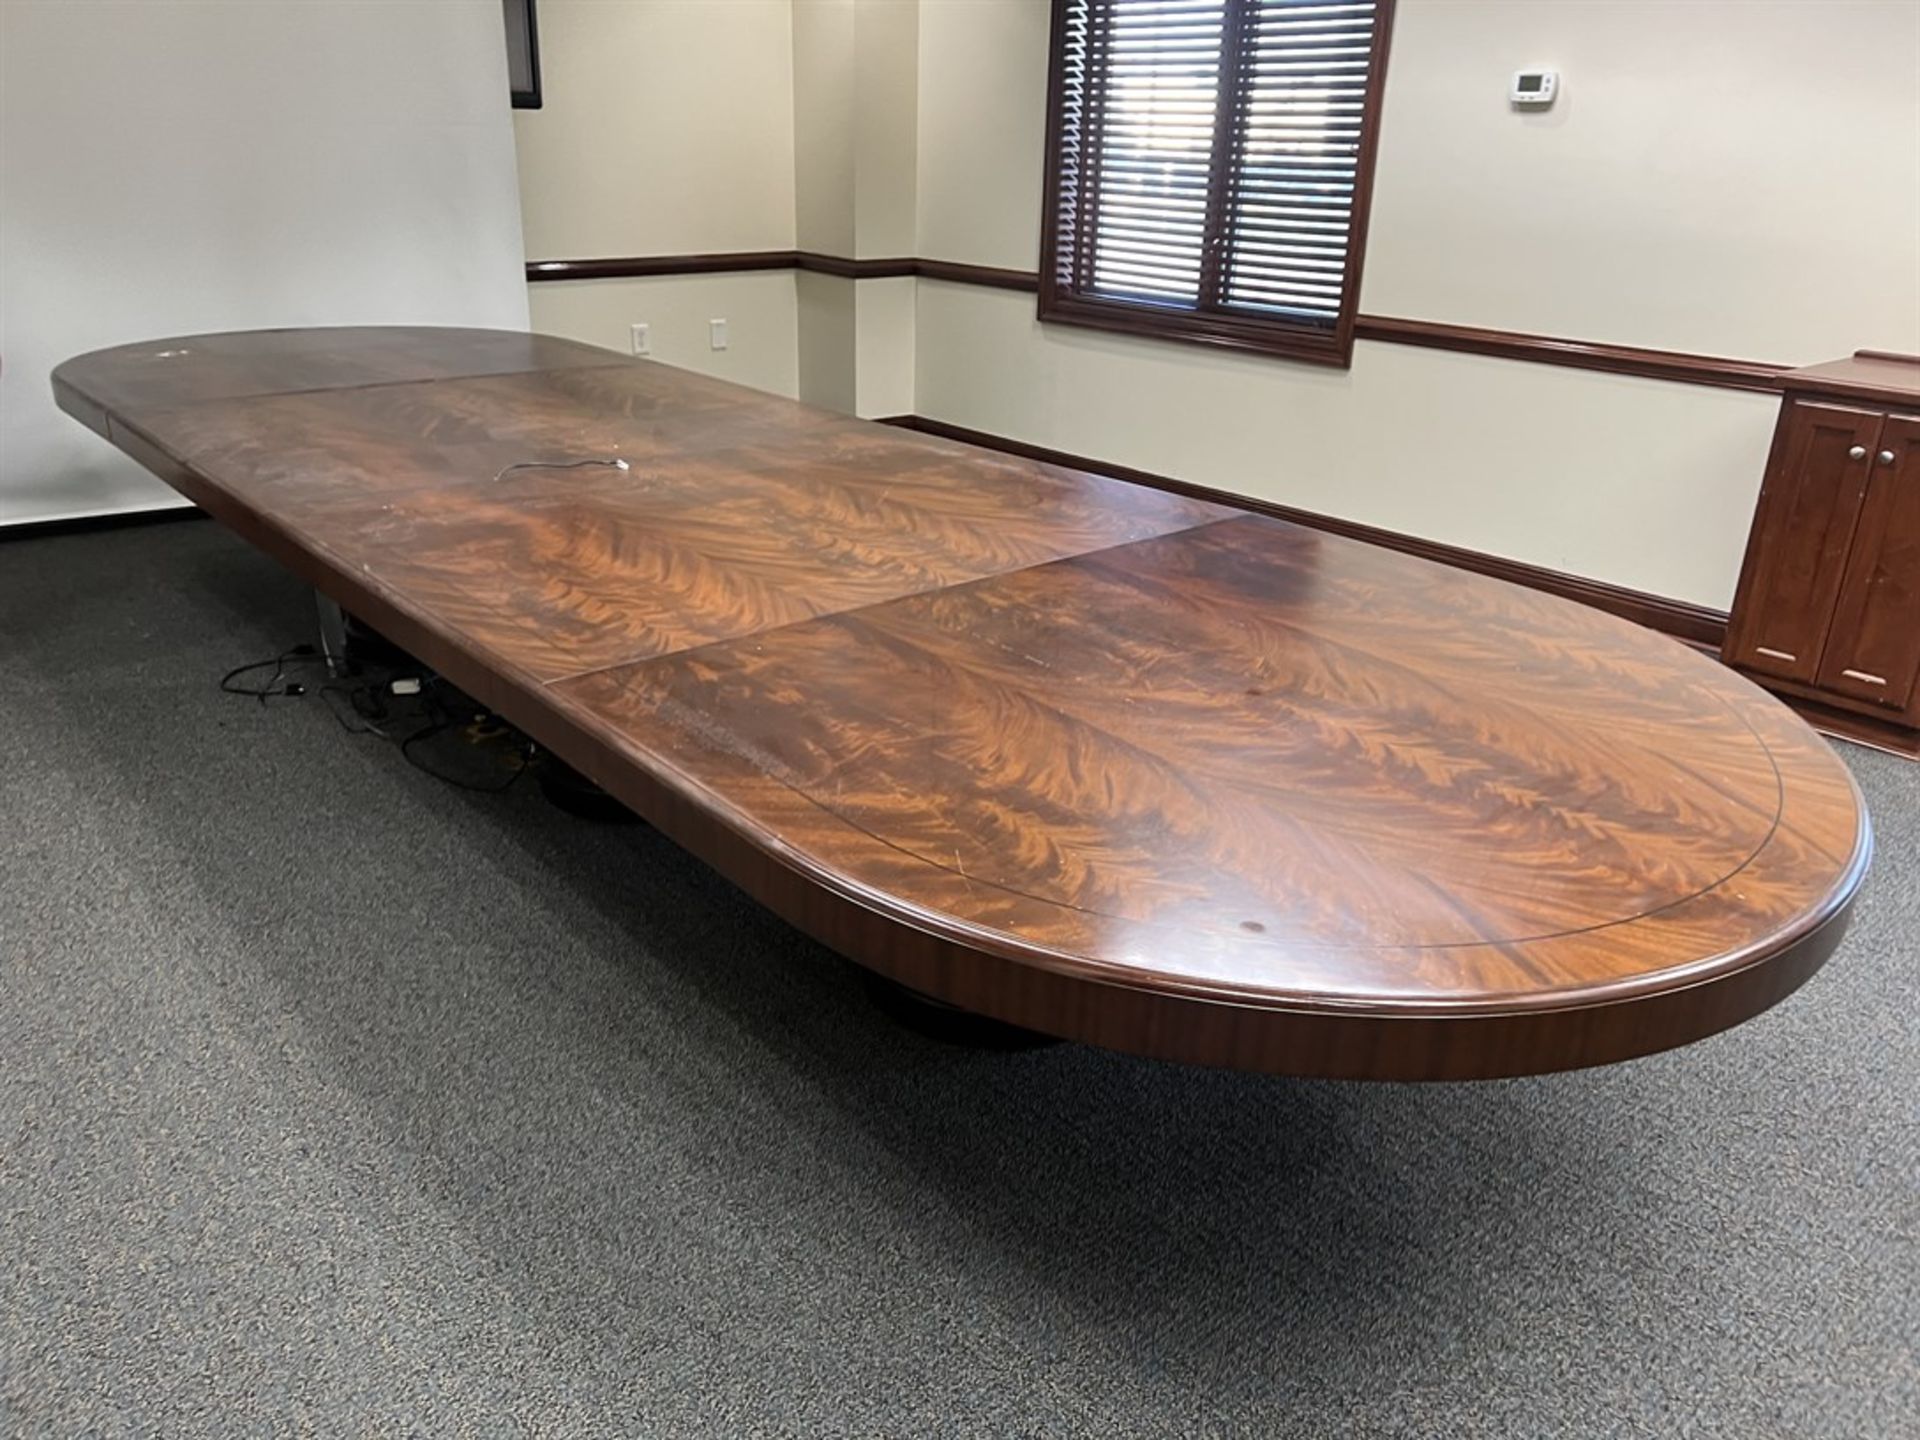 Contents of Office, Approx. 15' x 4' Conference Table, Side Table, Credenza (BUILDING 32)